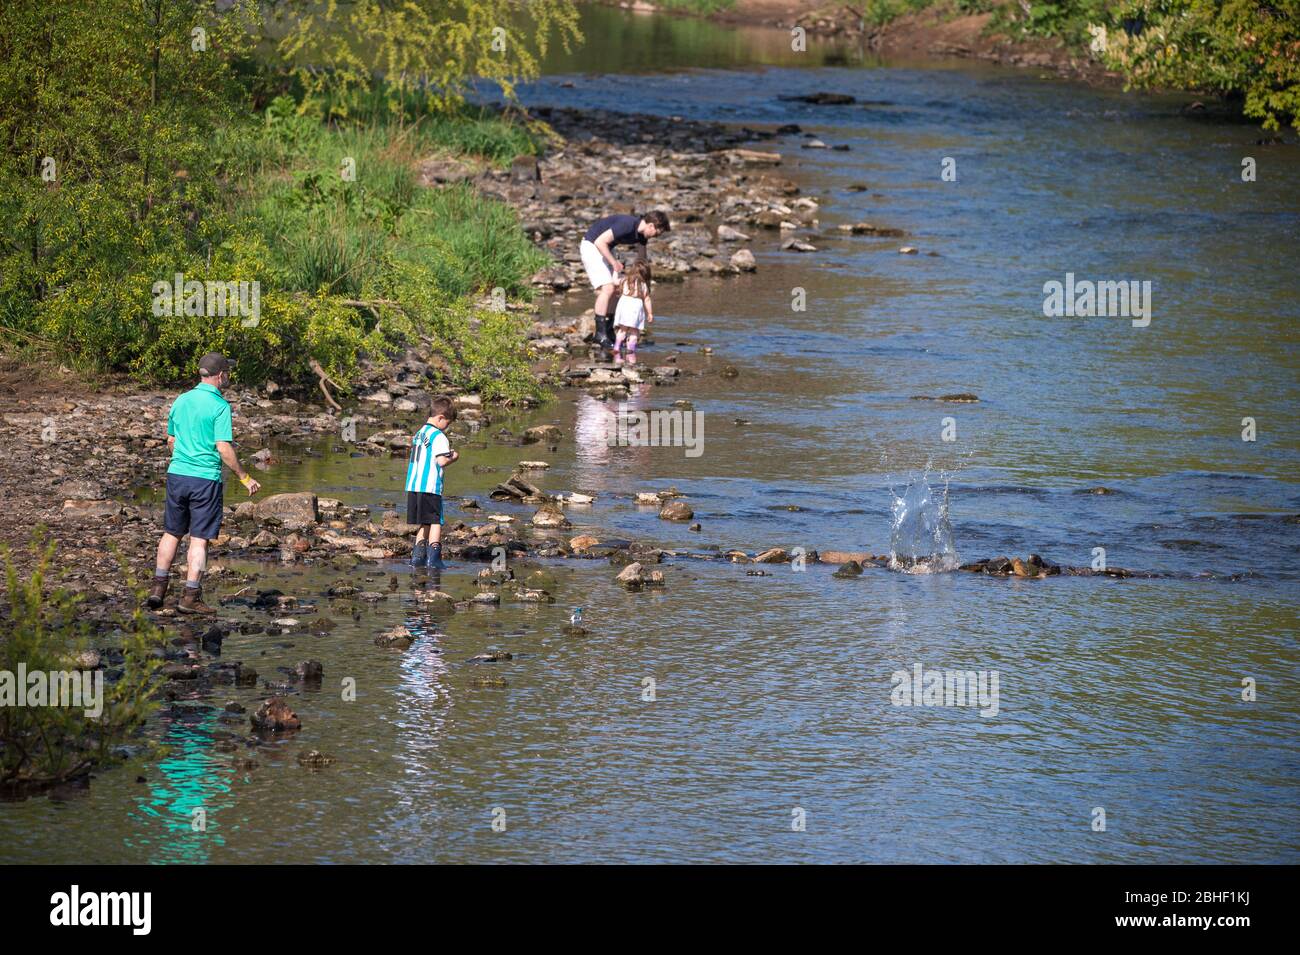 Glasgow, UK. 25th Apr, 2020. Pictured: People seen playing in the water of the River Kelvin which meanders through the edge of Kelvingrove Park. Scenes from the first weekend of the extended lockdown from KelvinGrove Park in Glasgow's West End during a very hot and sunny Saturday. Credit: Colin Fisher/Alamy Live News Stock Photo